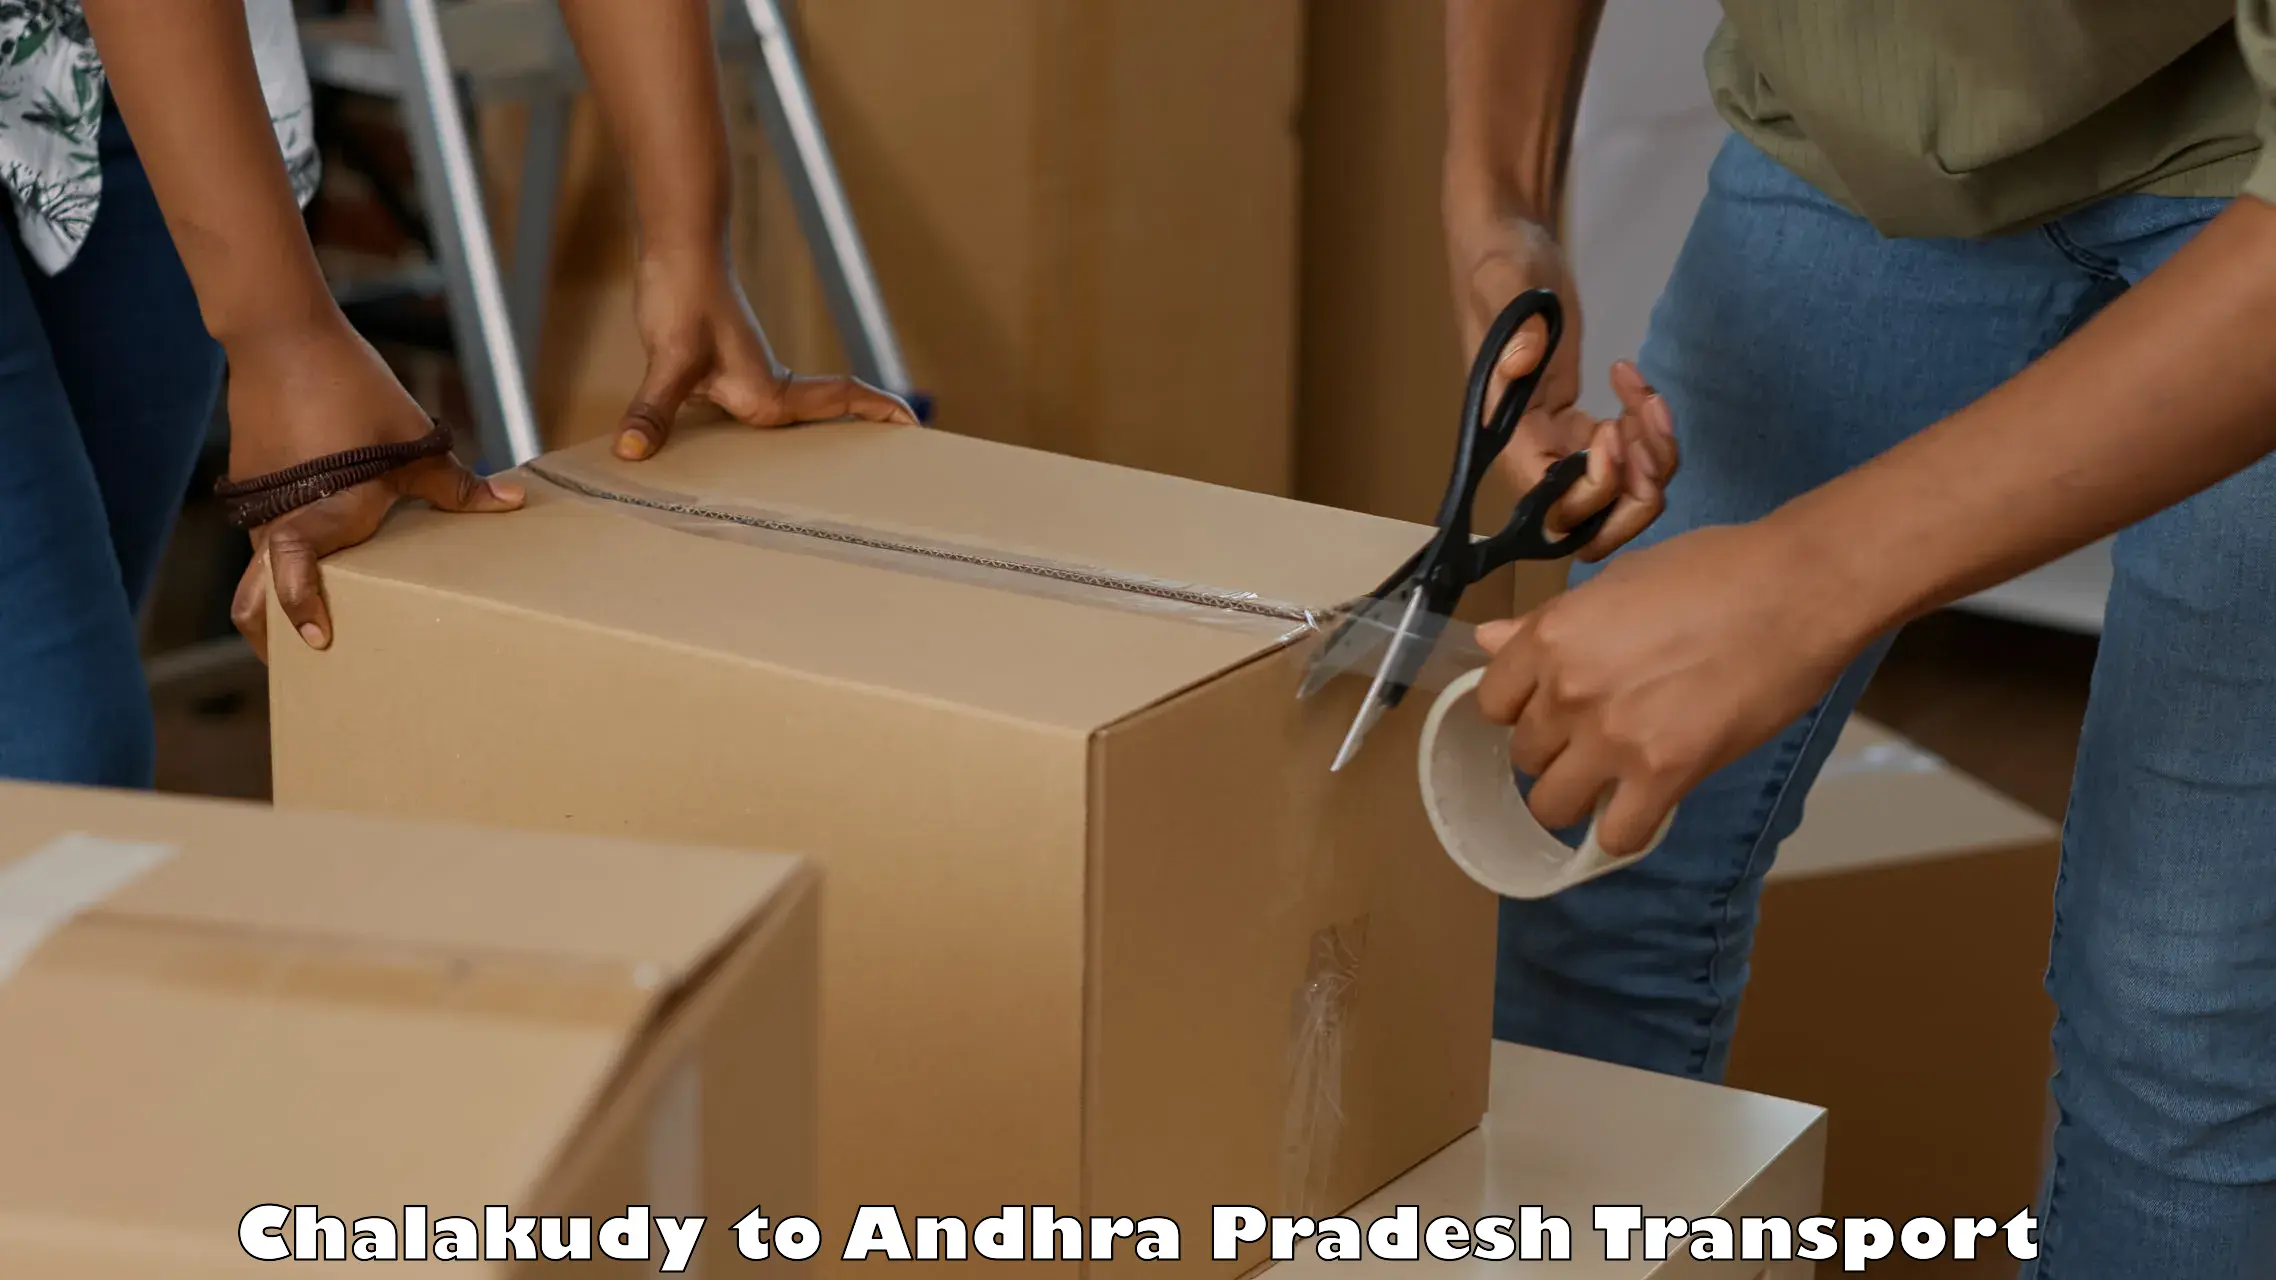 Part load transport service in India Chalakudy to Palasa